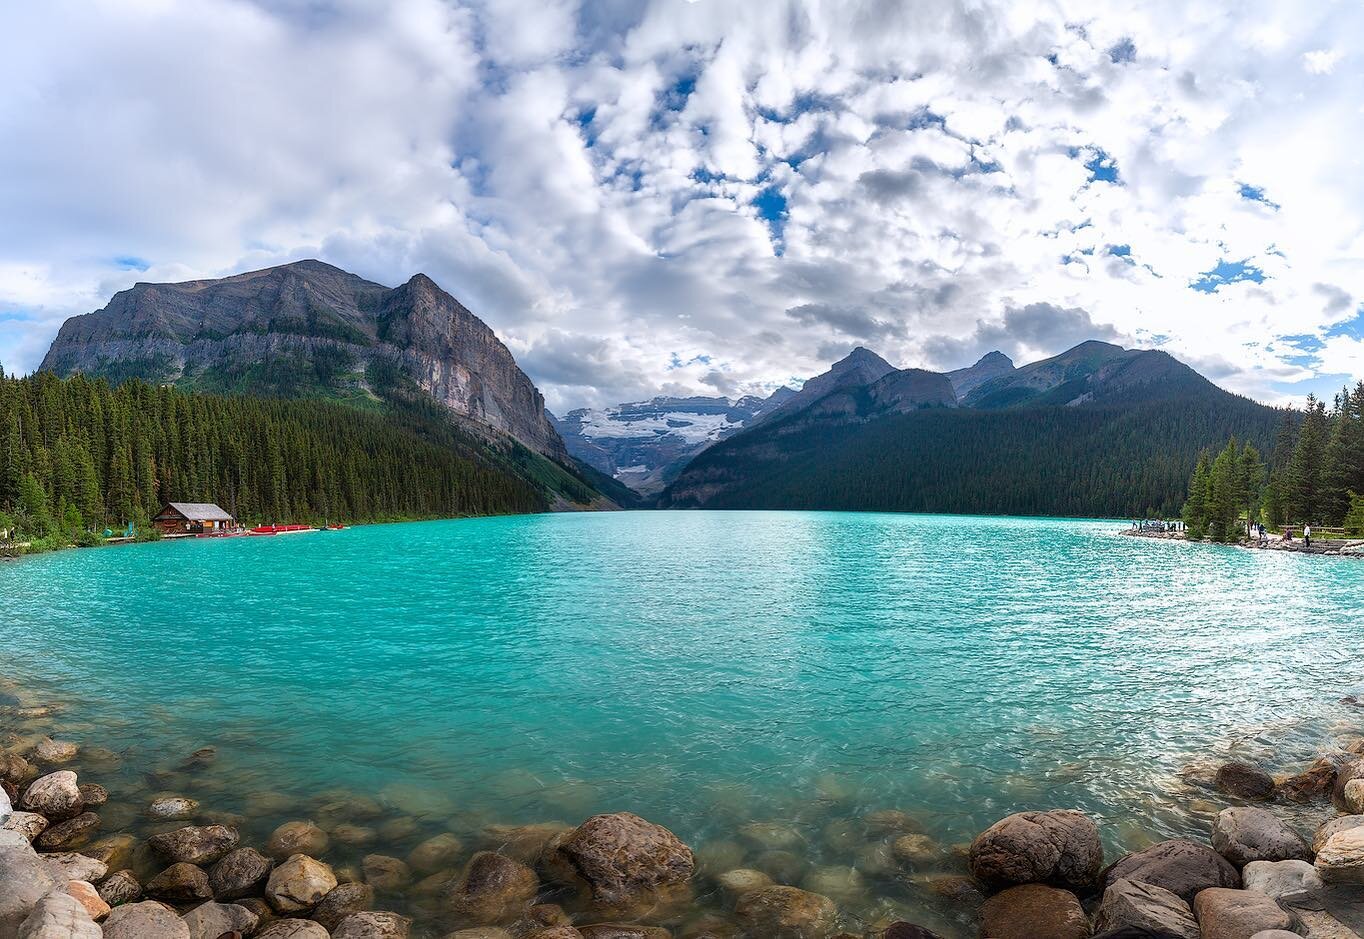 Full view of Lake Louise ! A pano shoot by 16-35 f4. 
&bull;
&bull;
&bull;
@canonusa 5DM3
@canonusa 16-35
&bull;
&bull;
&bull;
#shootoncanon #canonusa 
#banffnationalpark 
#banffnationalpark🇨🇦 
#lakelouise 
#lakelouisecanada 
#nationalparkgeek 
#na